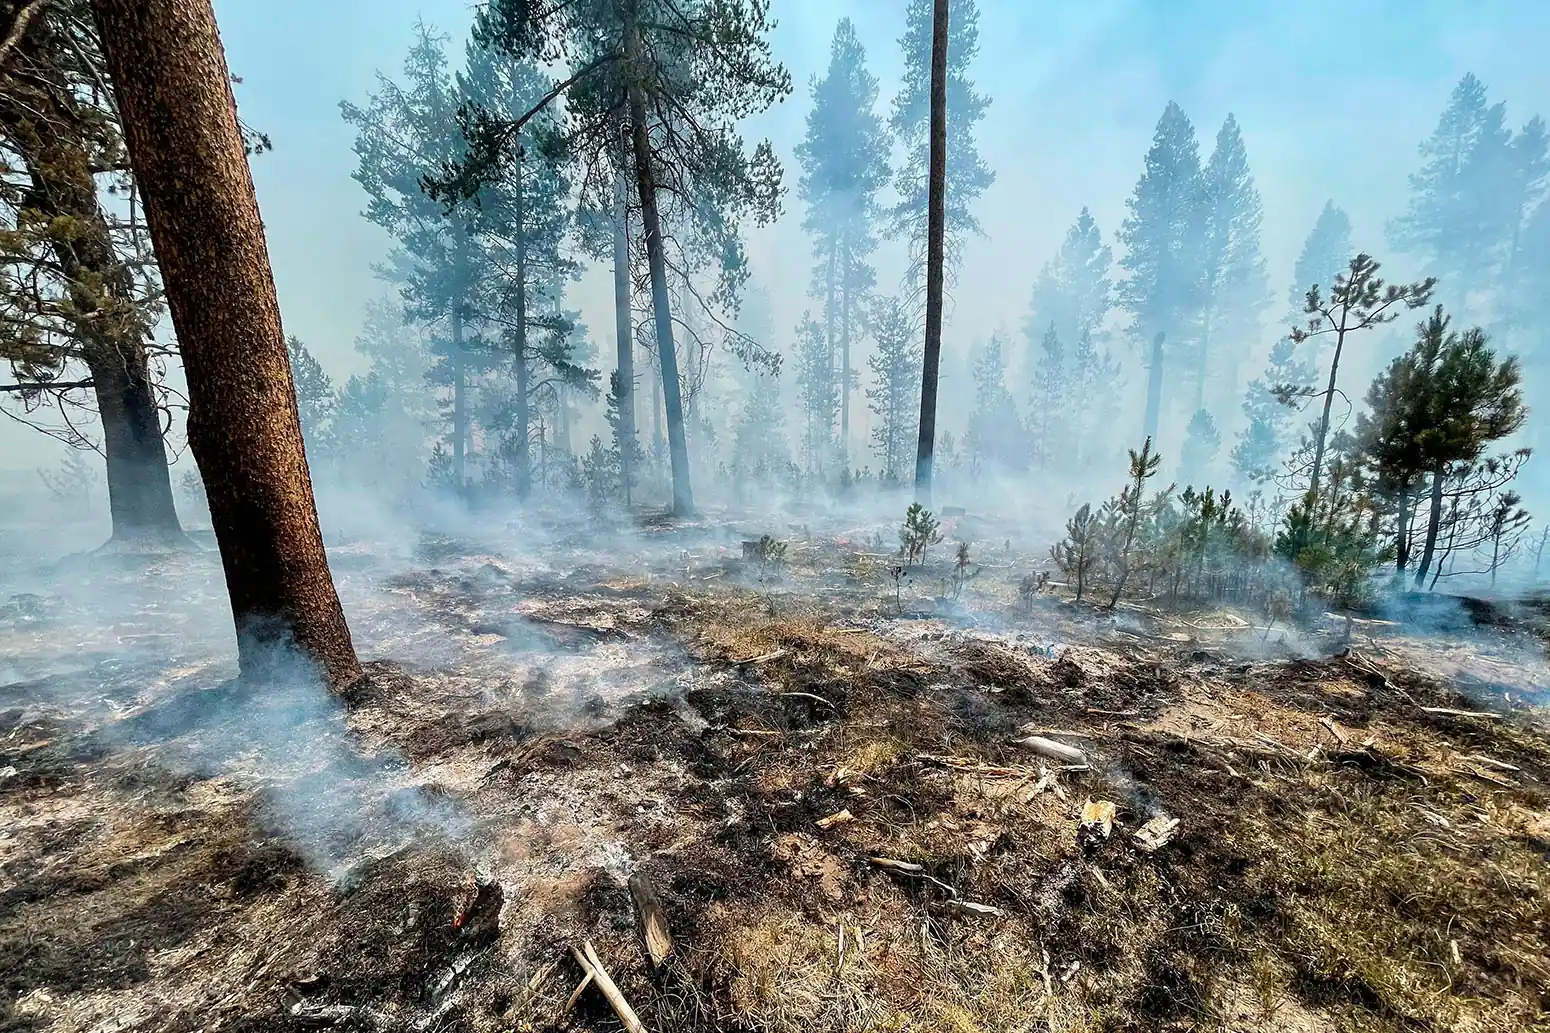 The Bootleg Fire is seen smoldering in southern Oregon, 17 July 2021. Credit: Associated Press / Alamy Stock Photo.